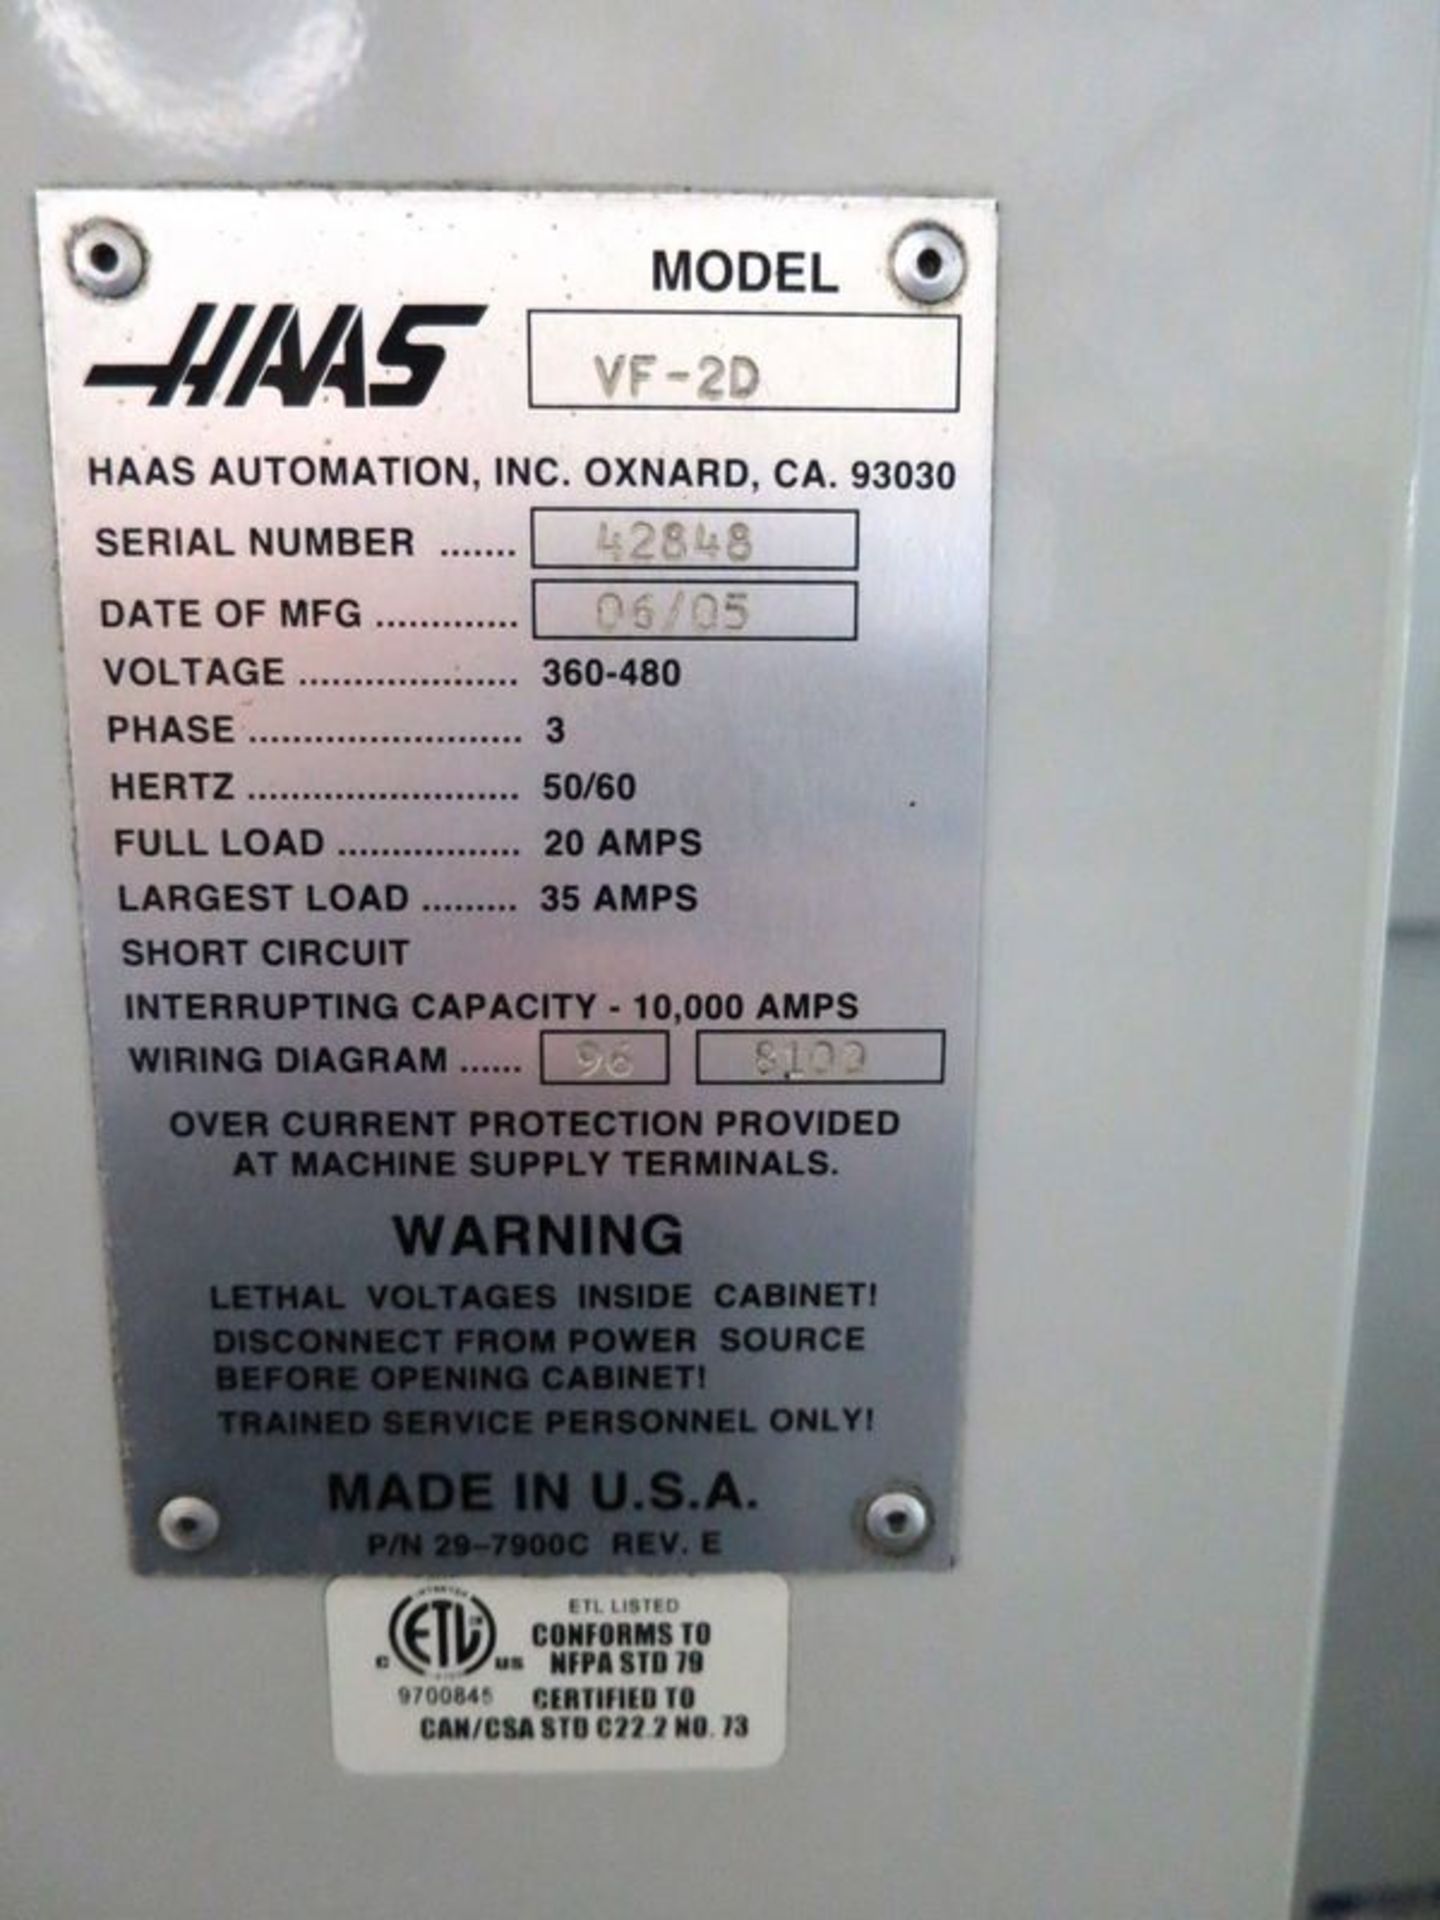 Haas Model VF-2D CNC Machining Center, S/N 42848, New 2005 - Image 10 of 12